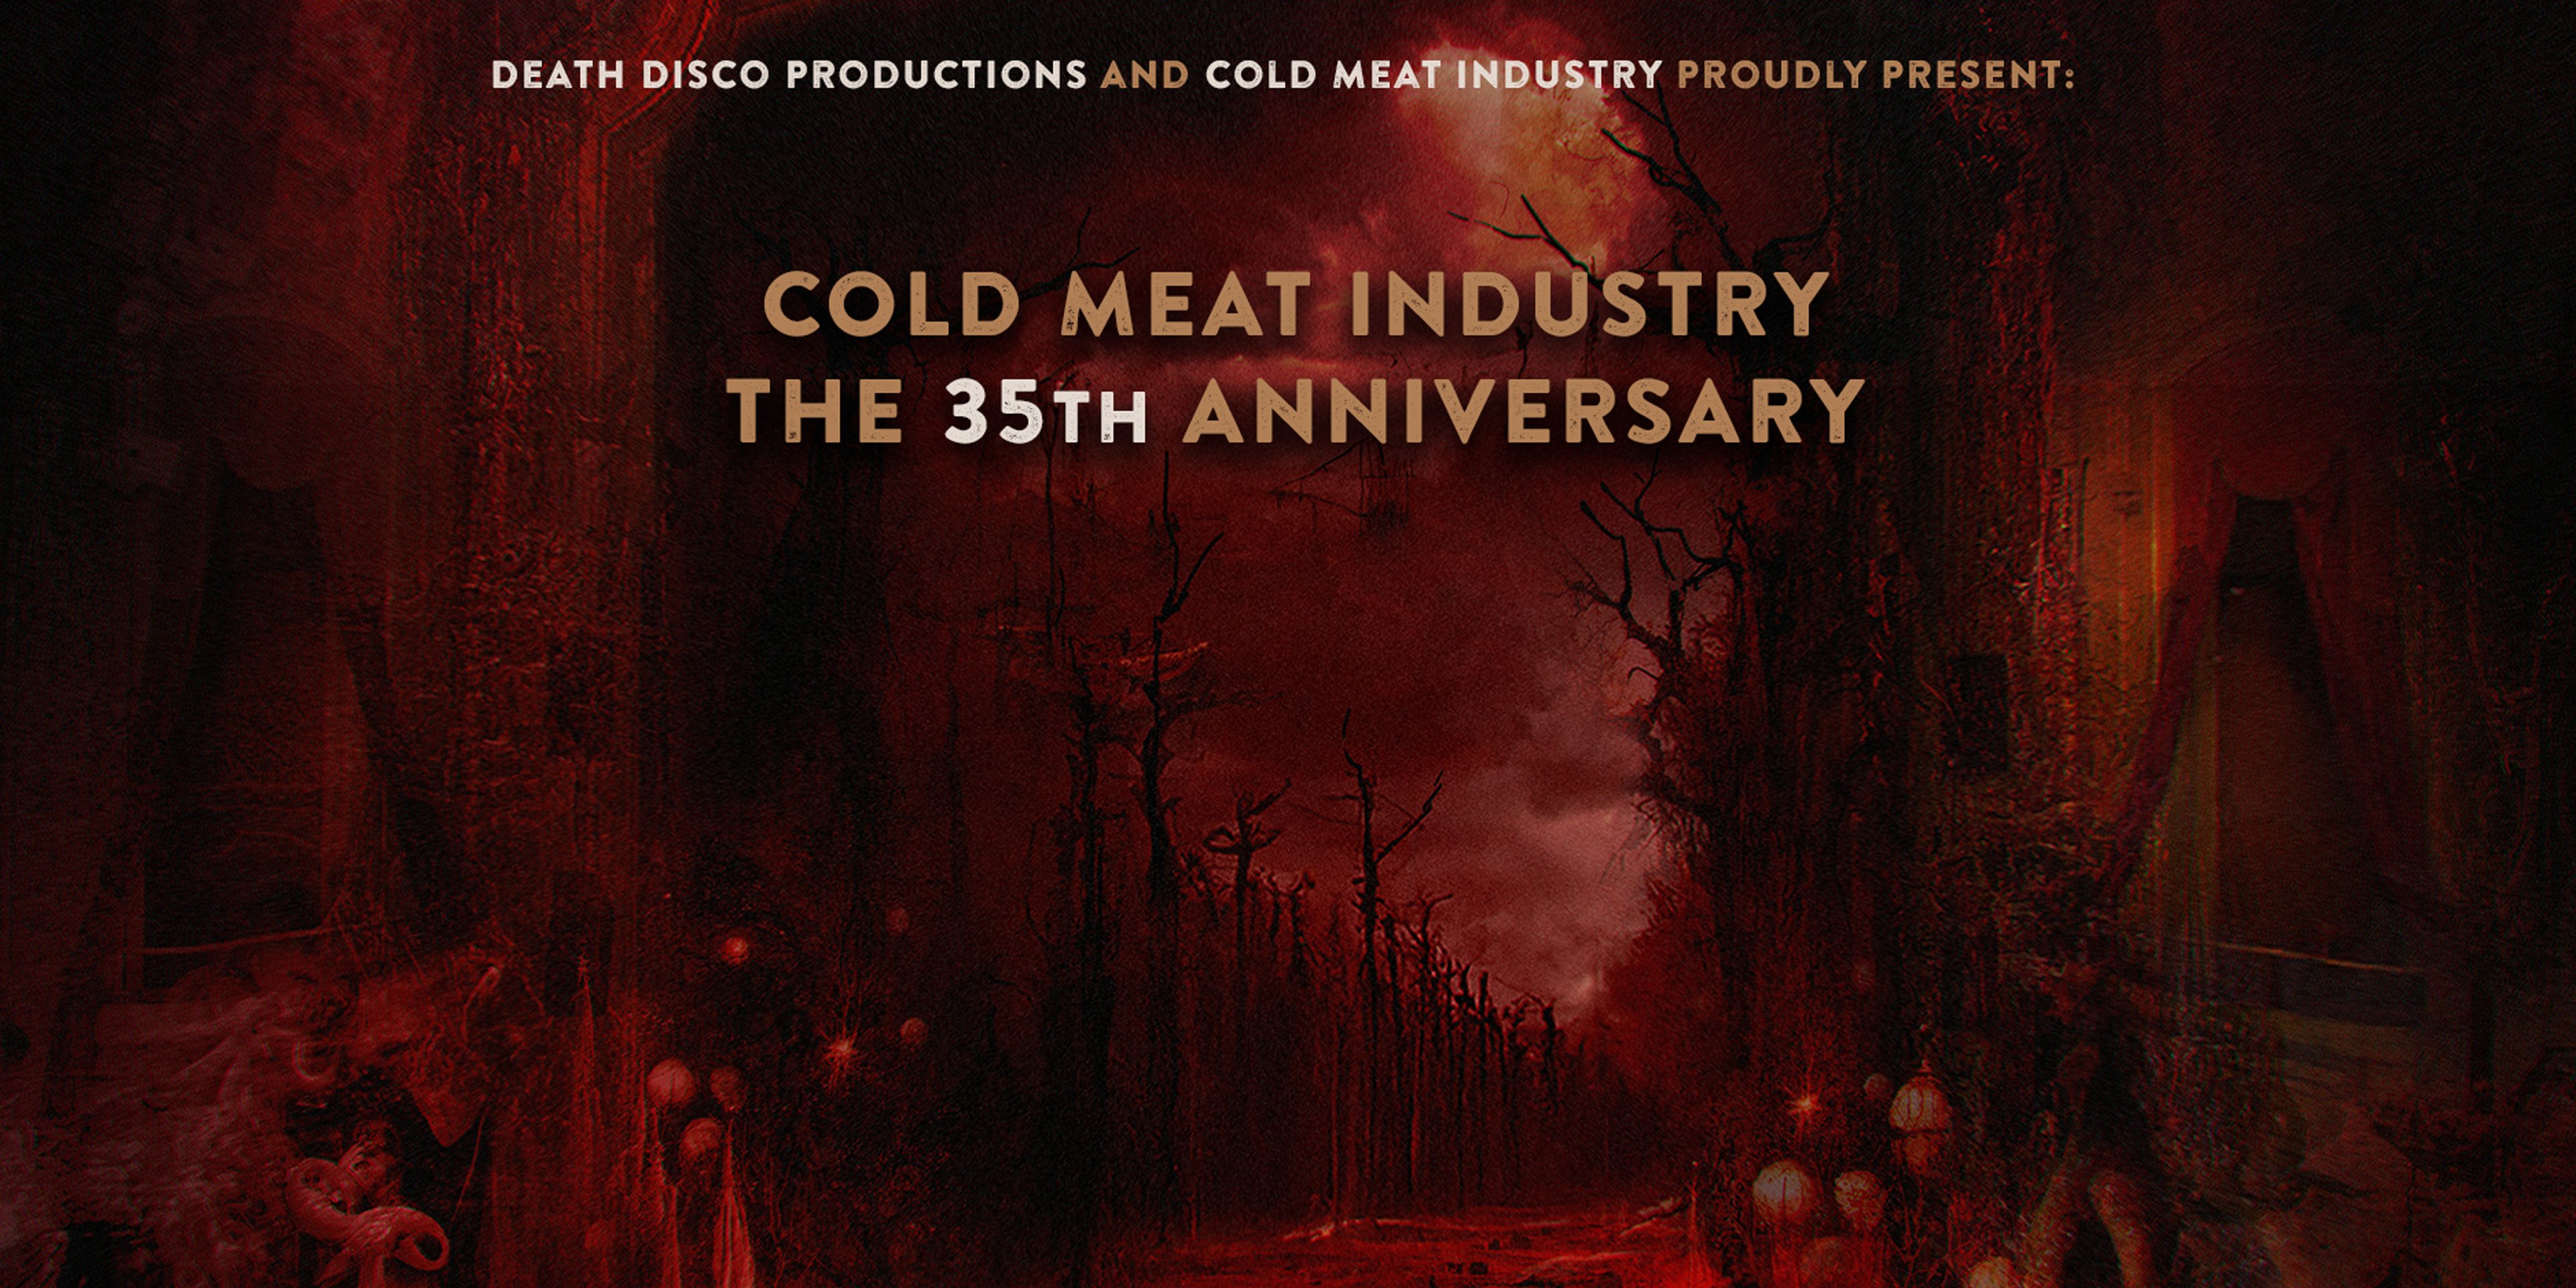 The 35th Anniversary of Cold Meat Industry